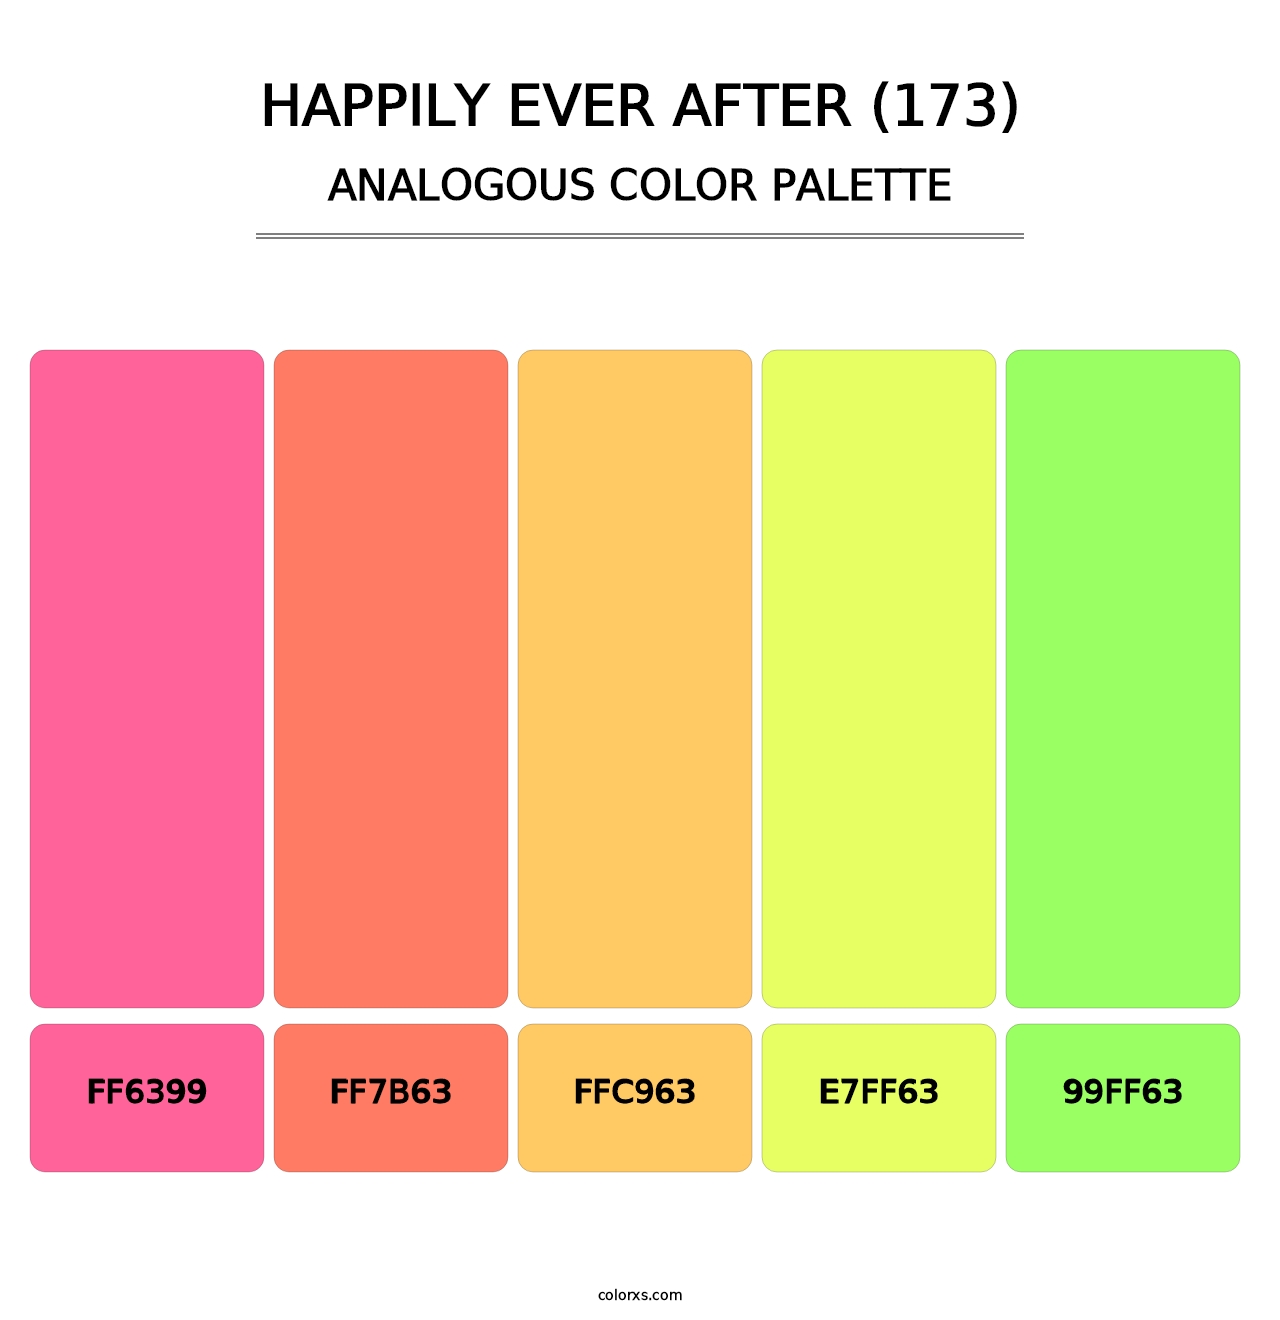 Happily Ever After (173) - Analogous Color Palette